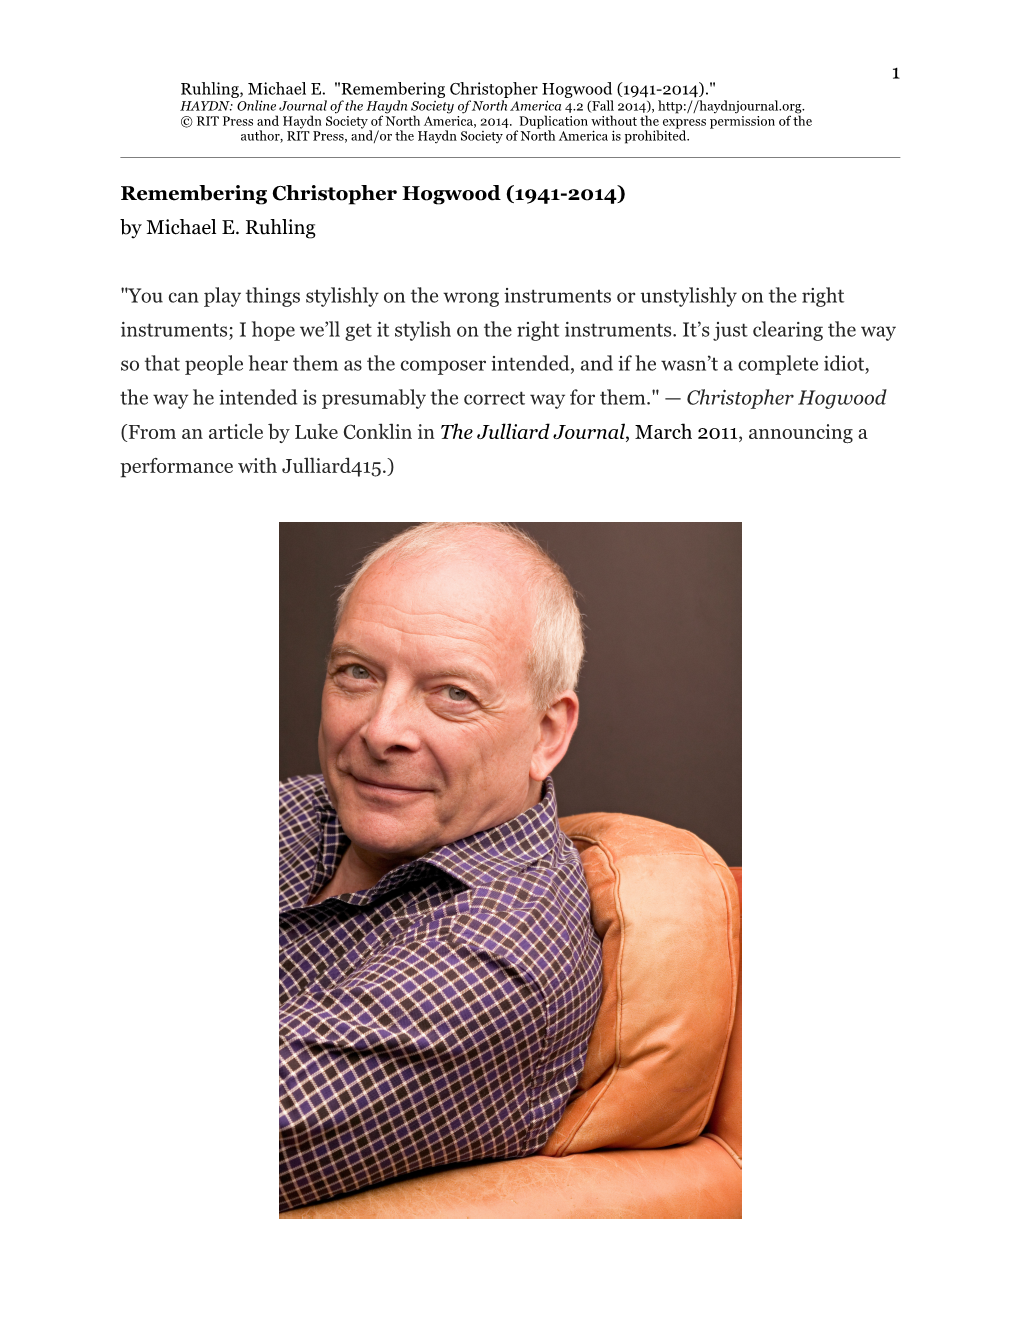 1 Remembering Christopher Hogwood (1941-2014) by Michael